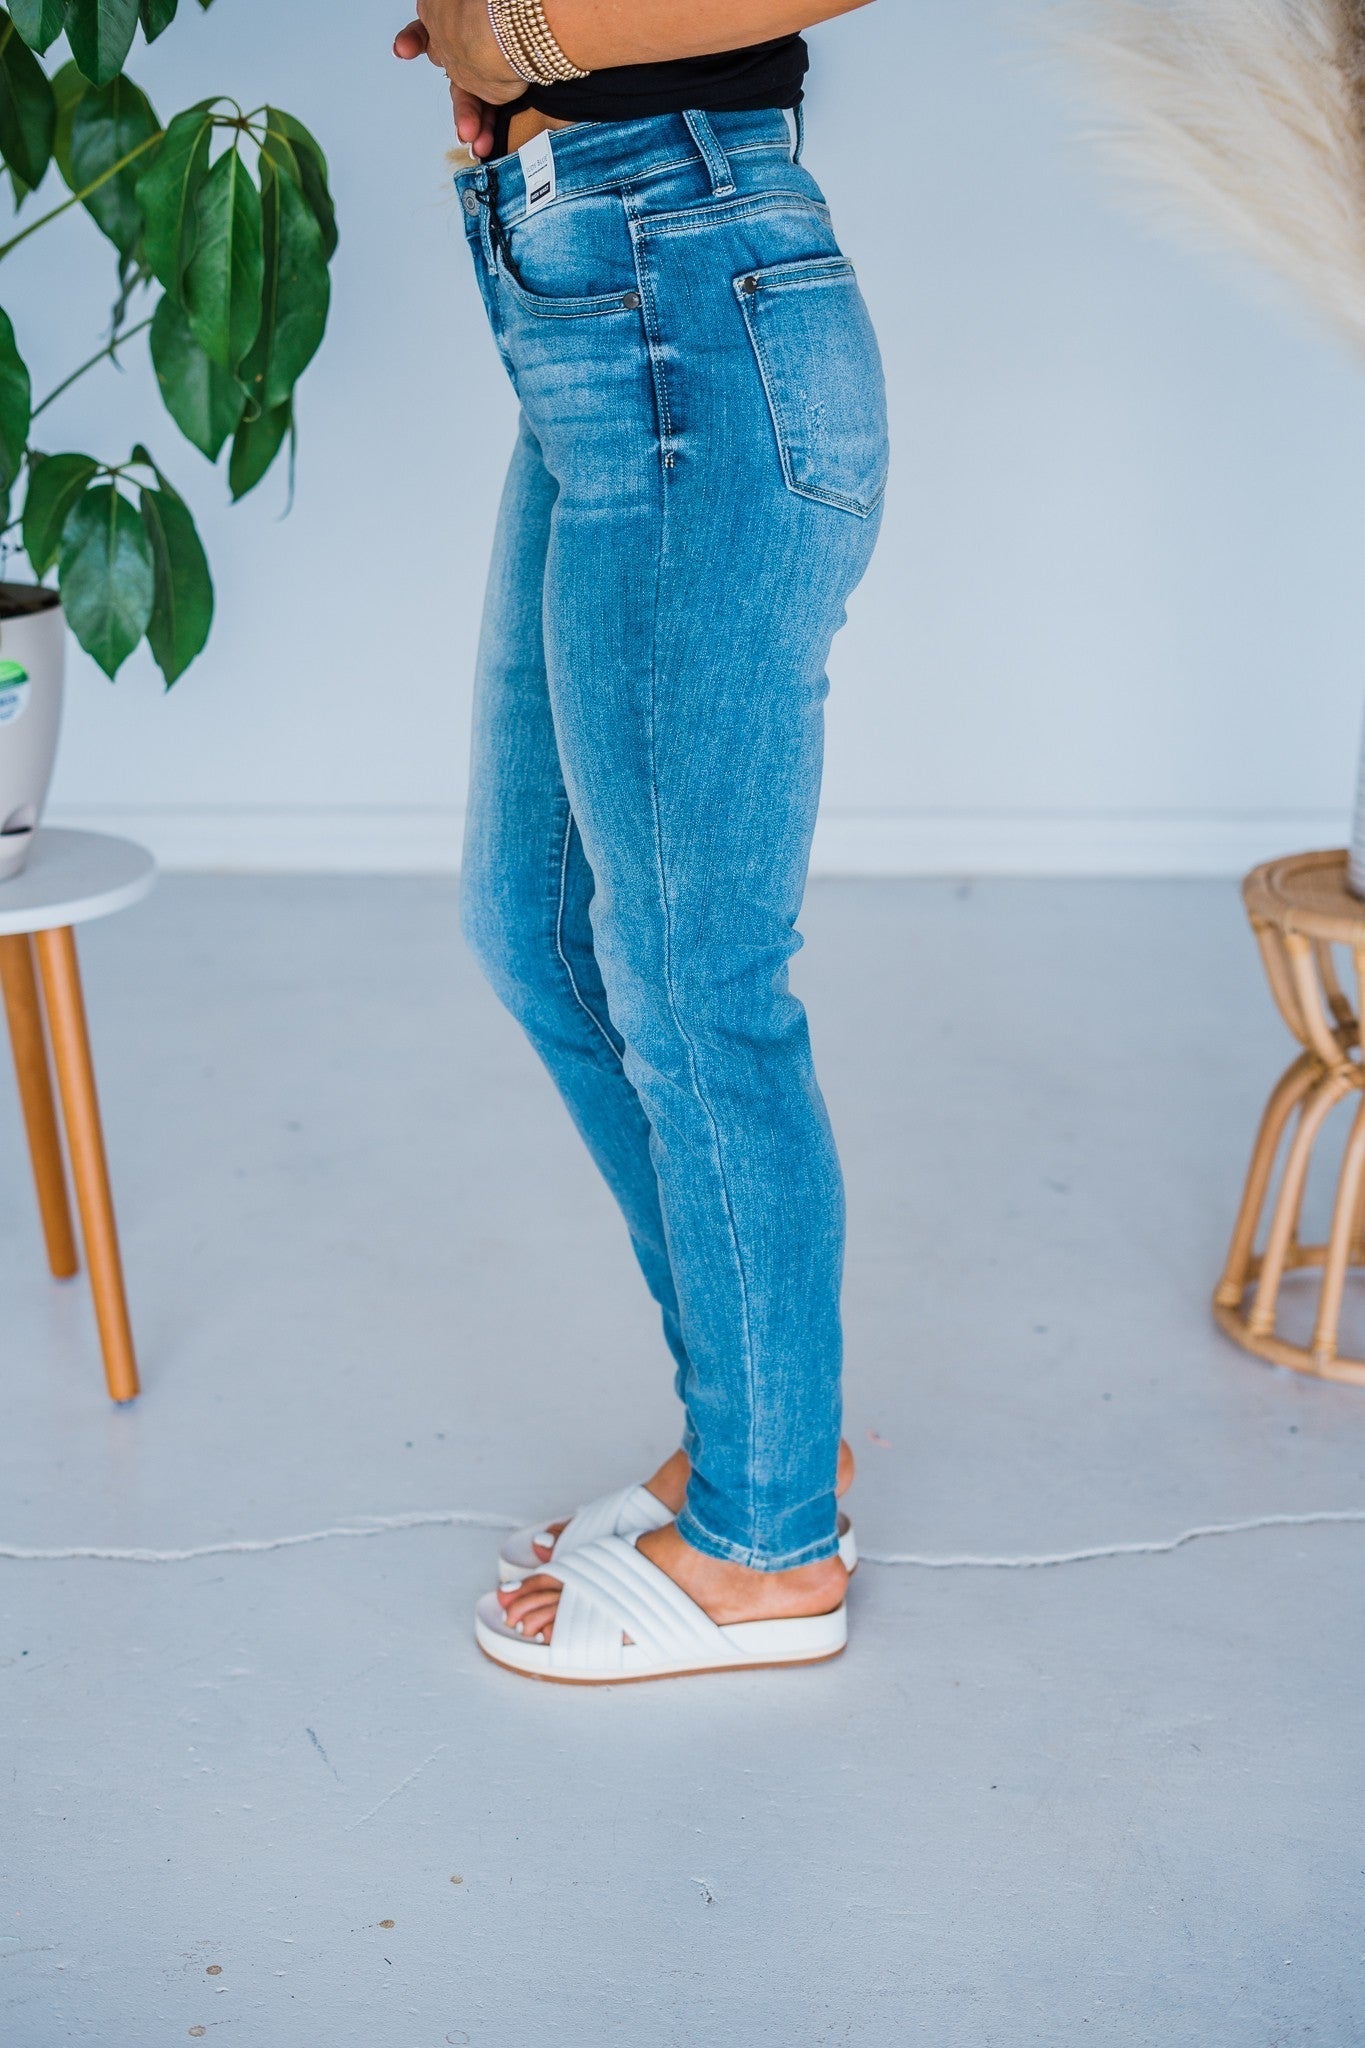 Judy Blue Relaxed Bleach Wash Jeans - Whiskey Skies